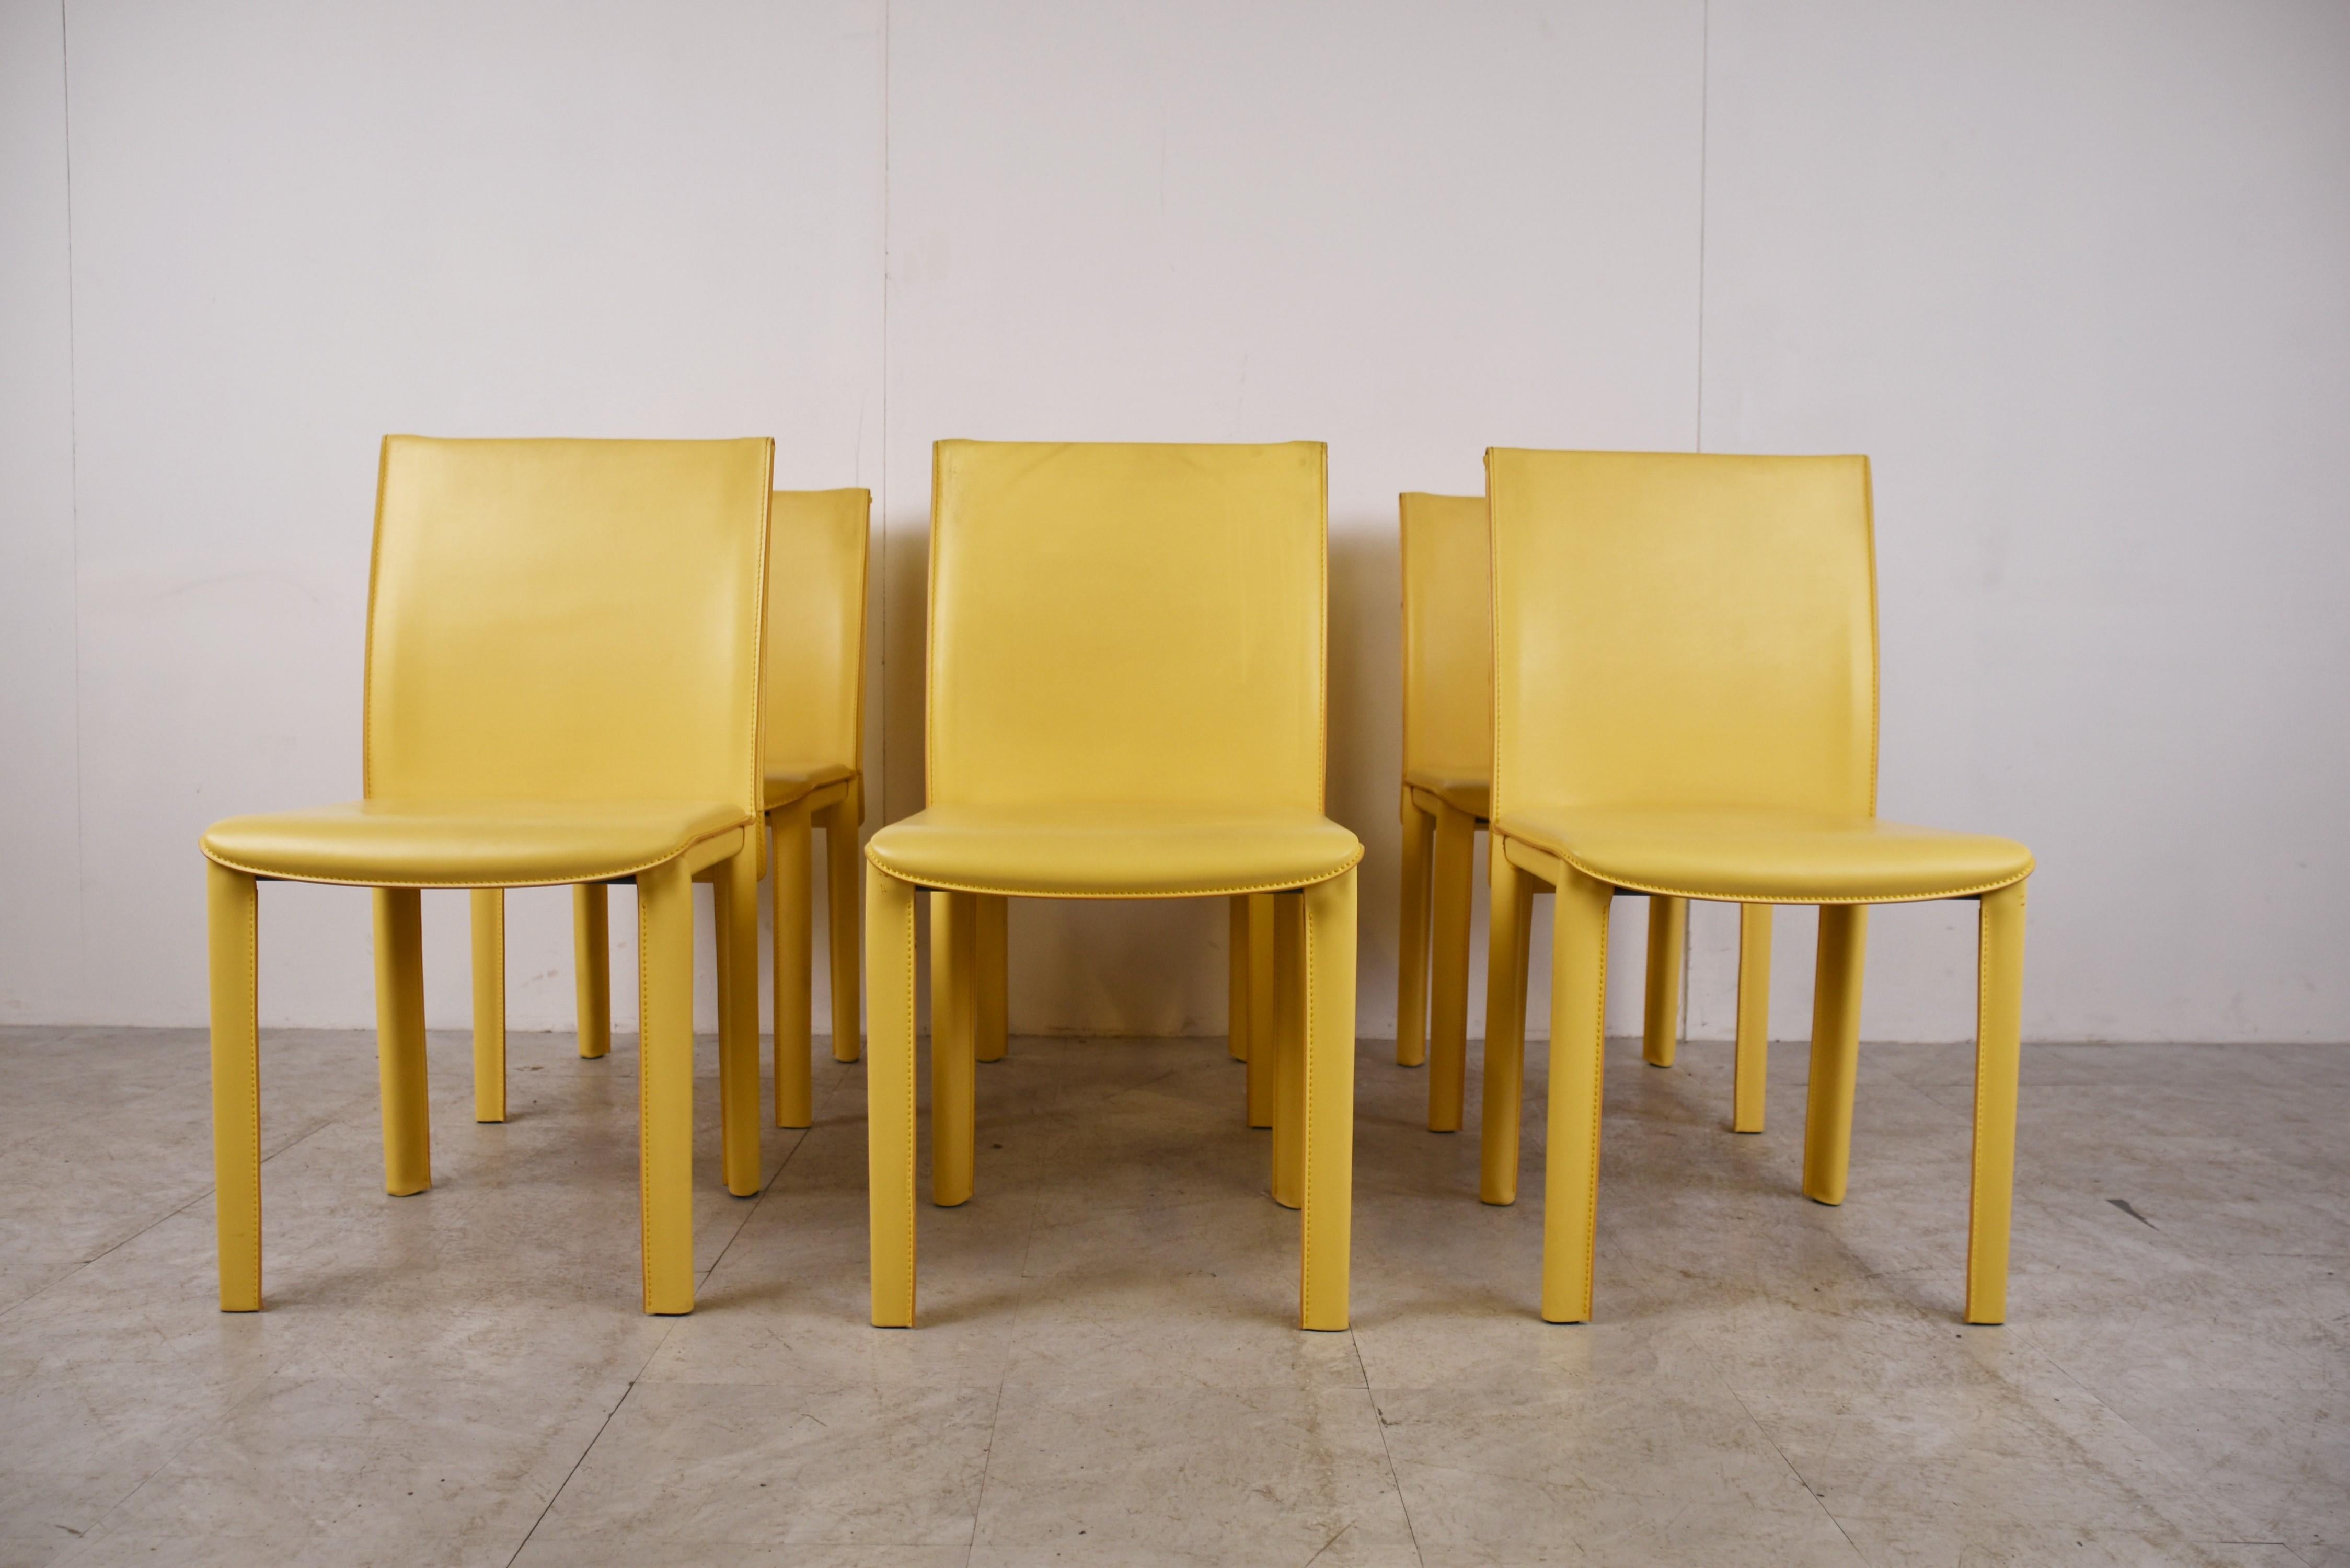 Rare yellow leather dining chairs by Arper Italy.

High quality and sturdy stiched leather dining chairs with a timeless design. 

A nice detail to mention is the cross stitching at the back.

Good condition

Dimensions:
Height: